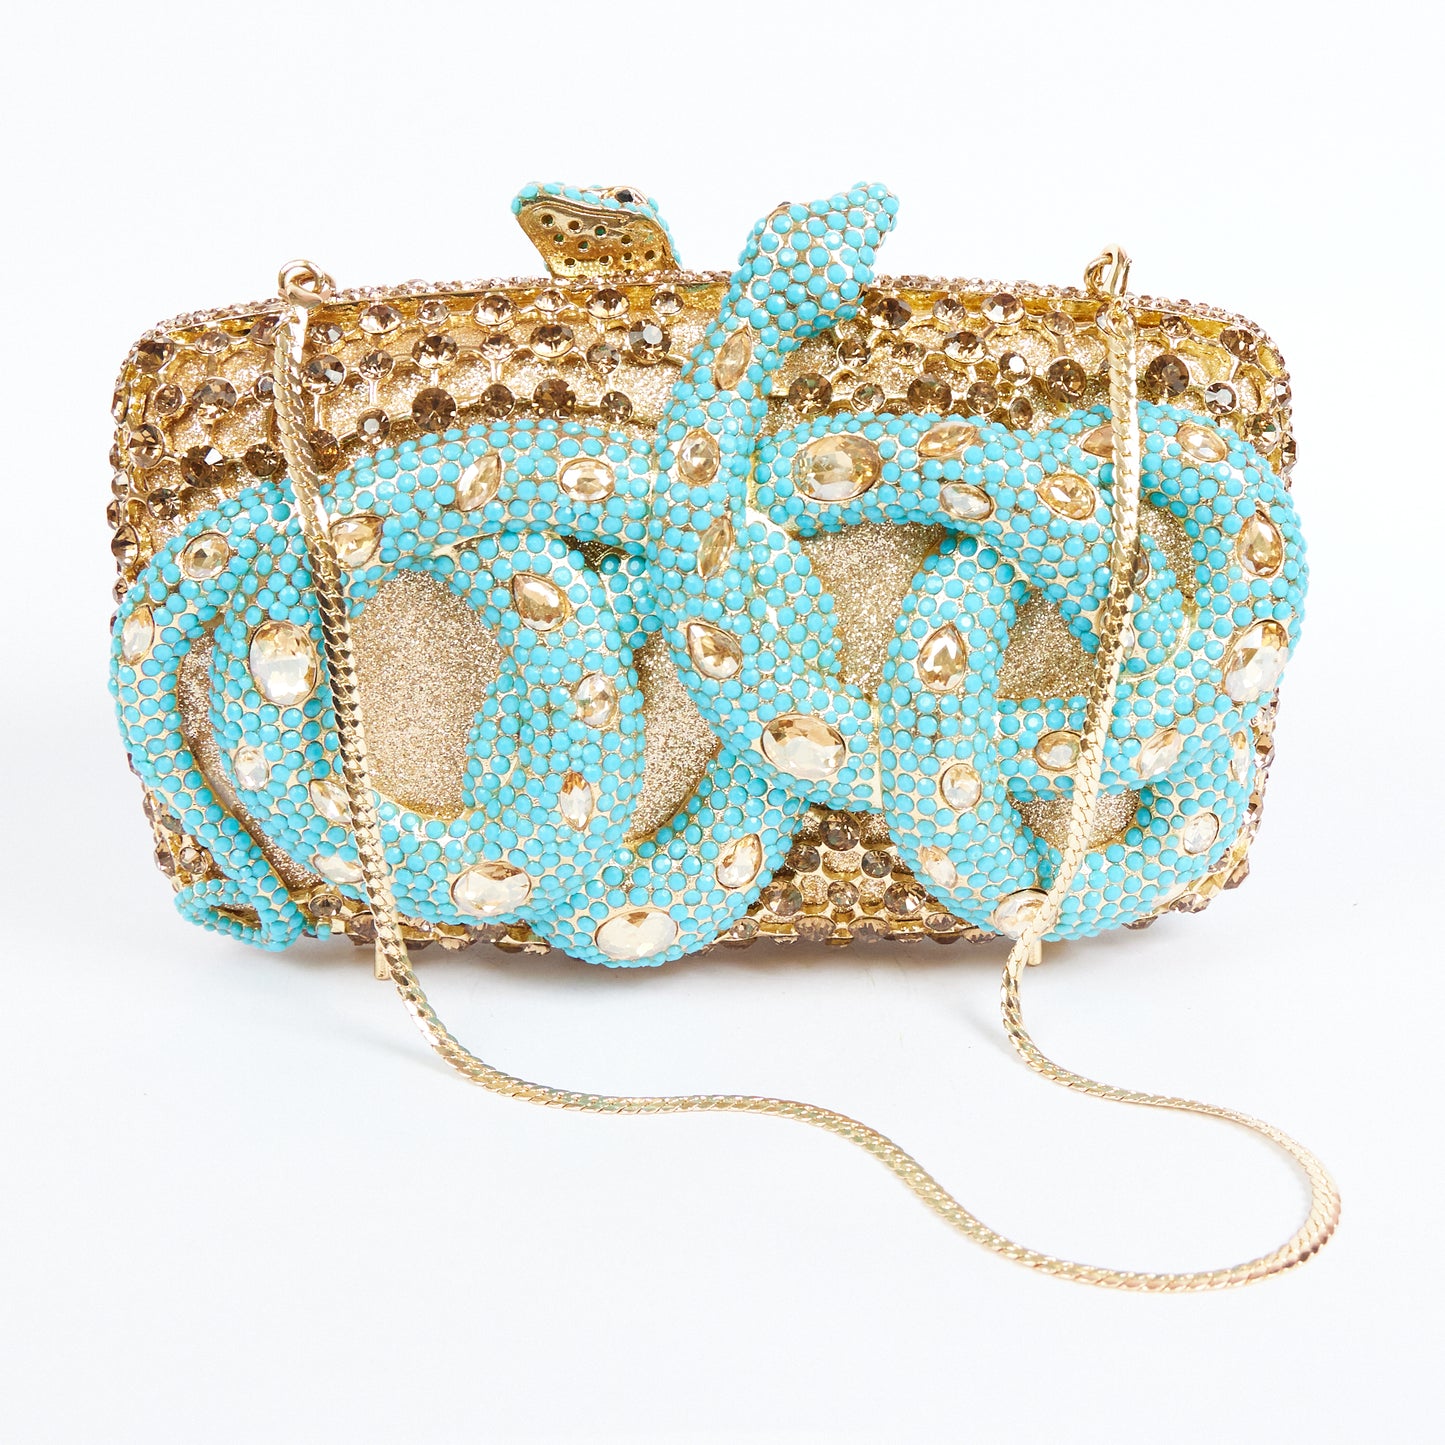 Turquoise Snake Clutch